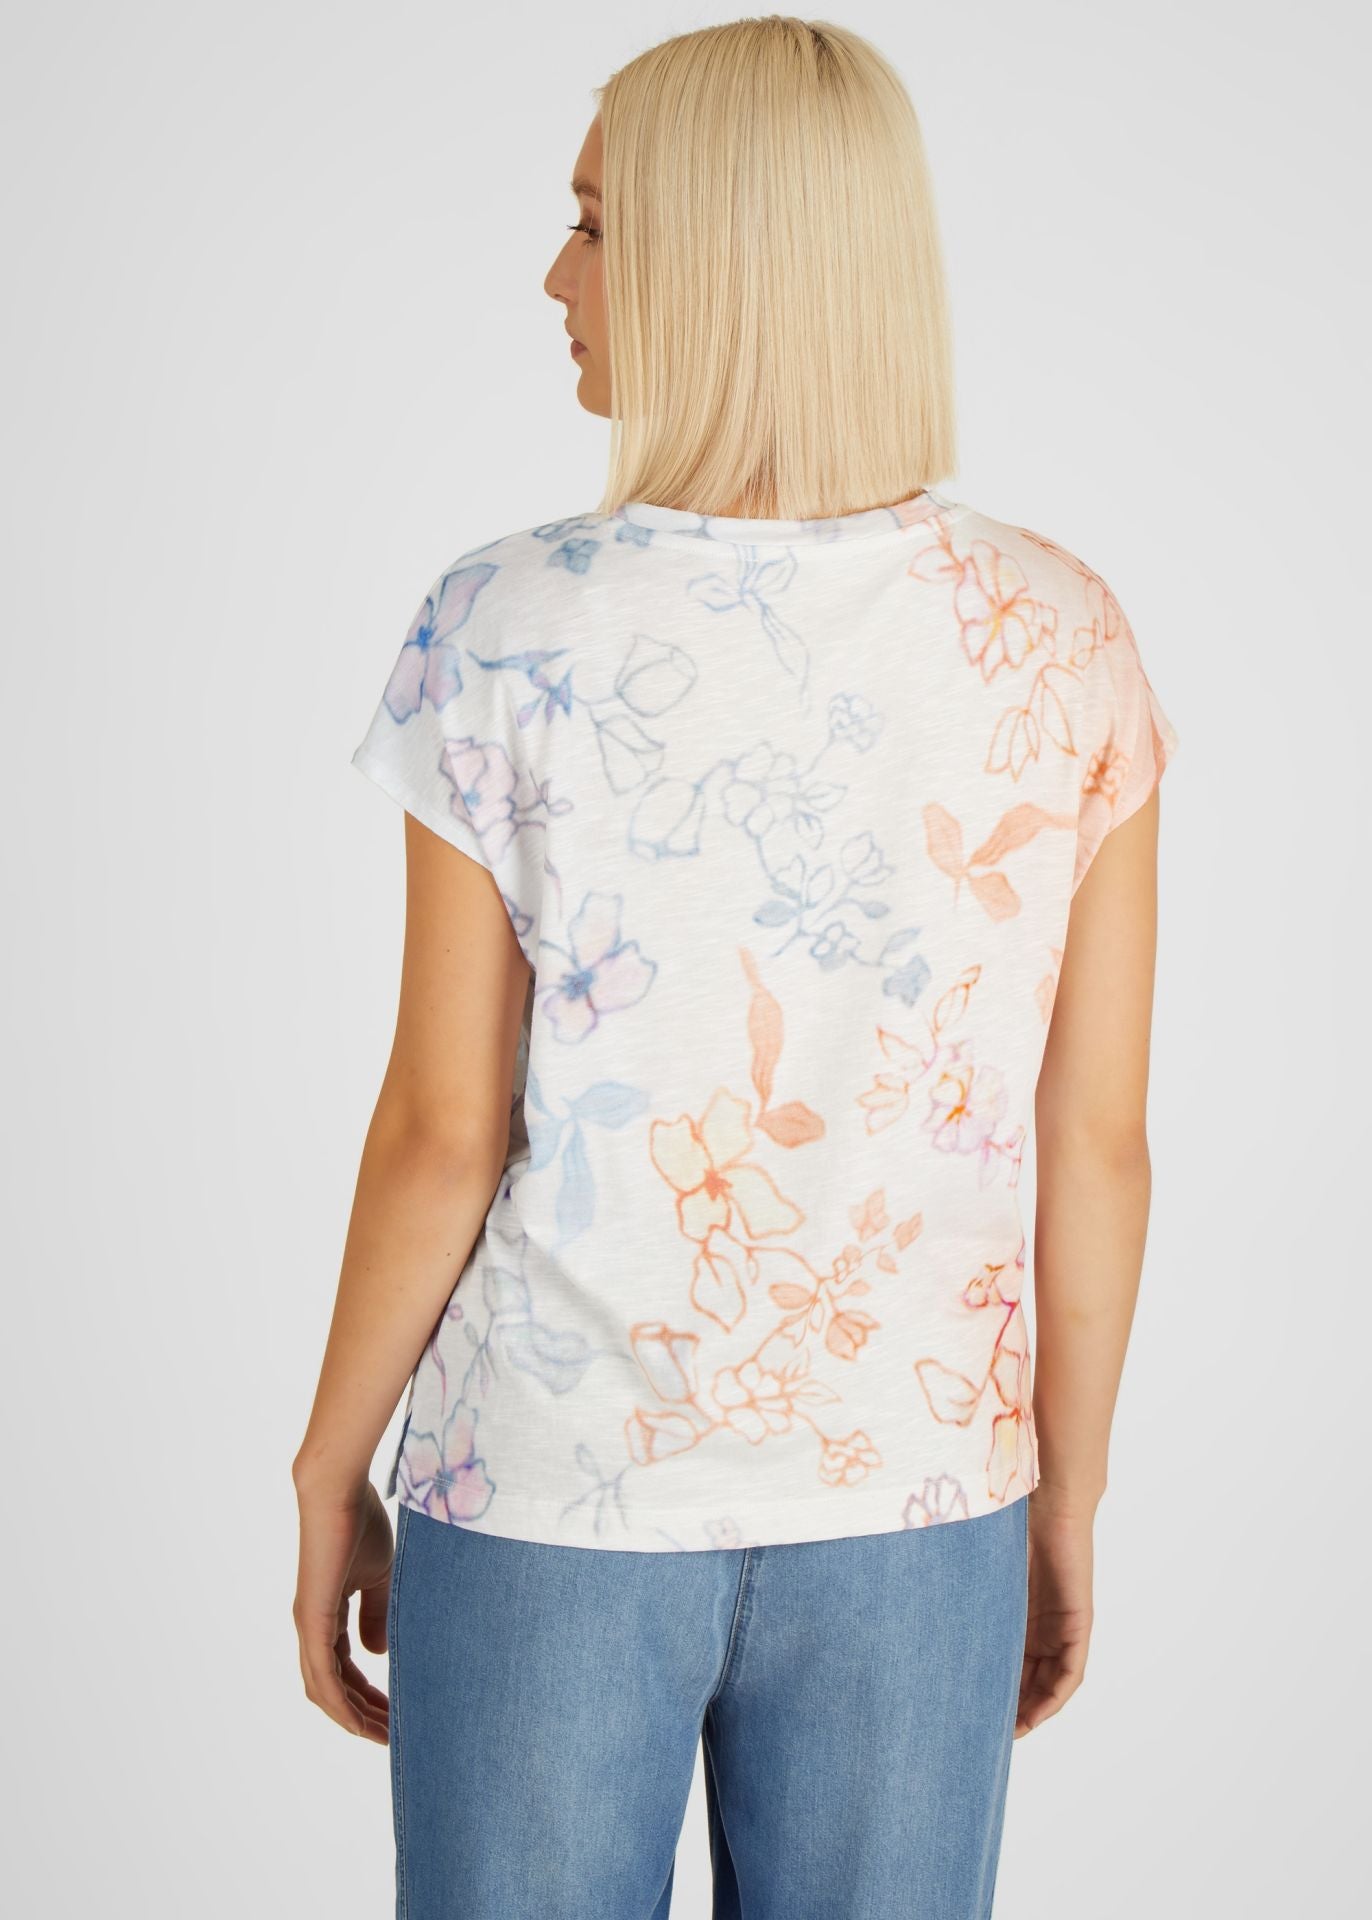 Blooming Blossoms Tee